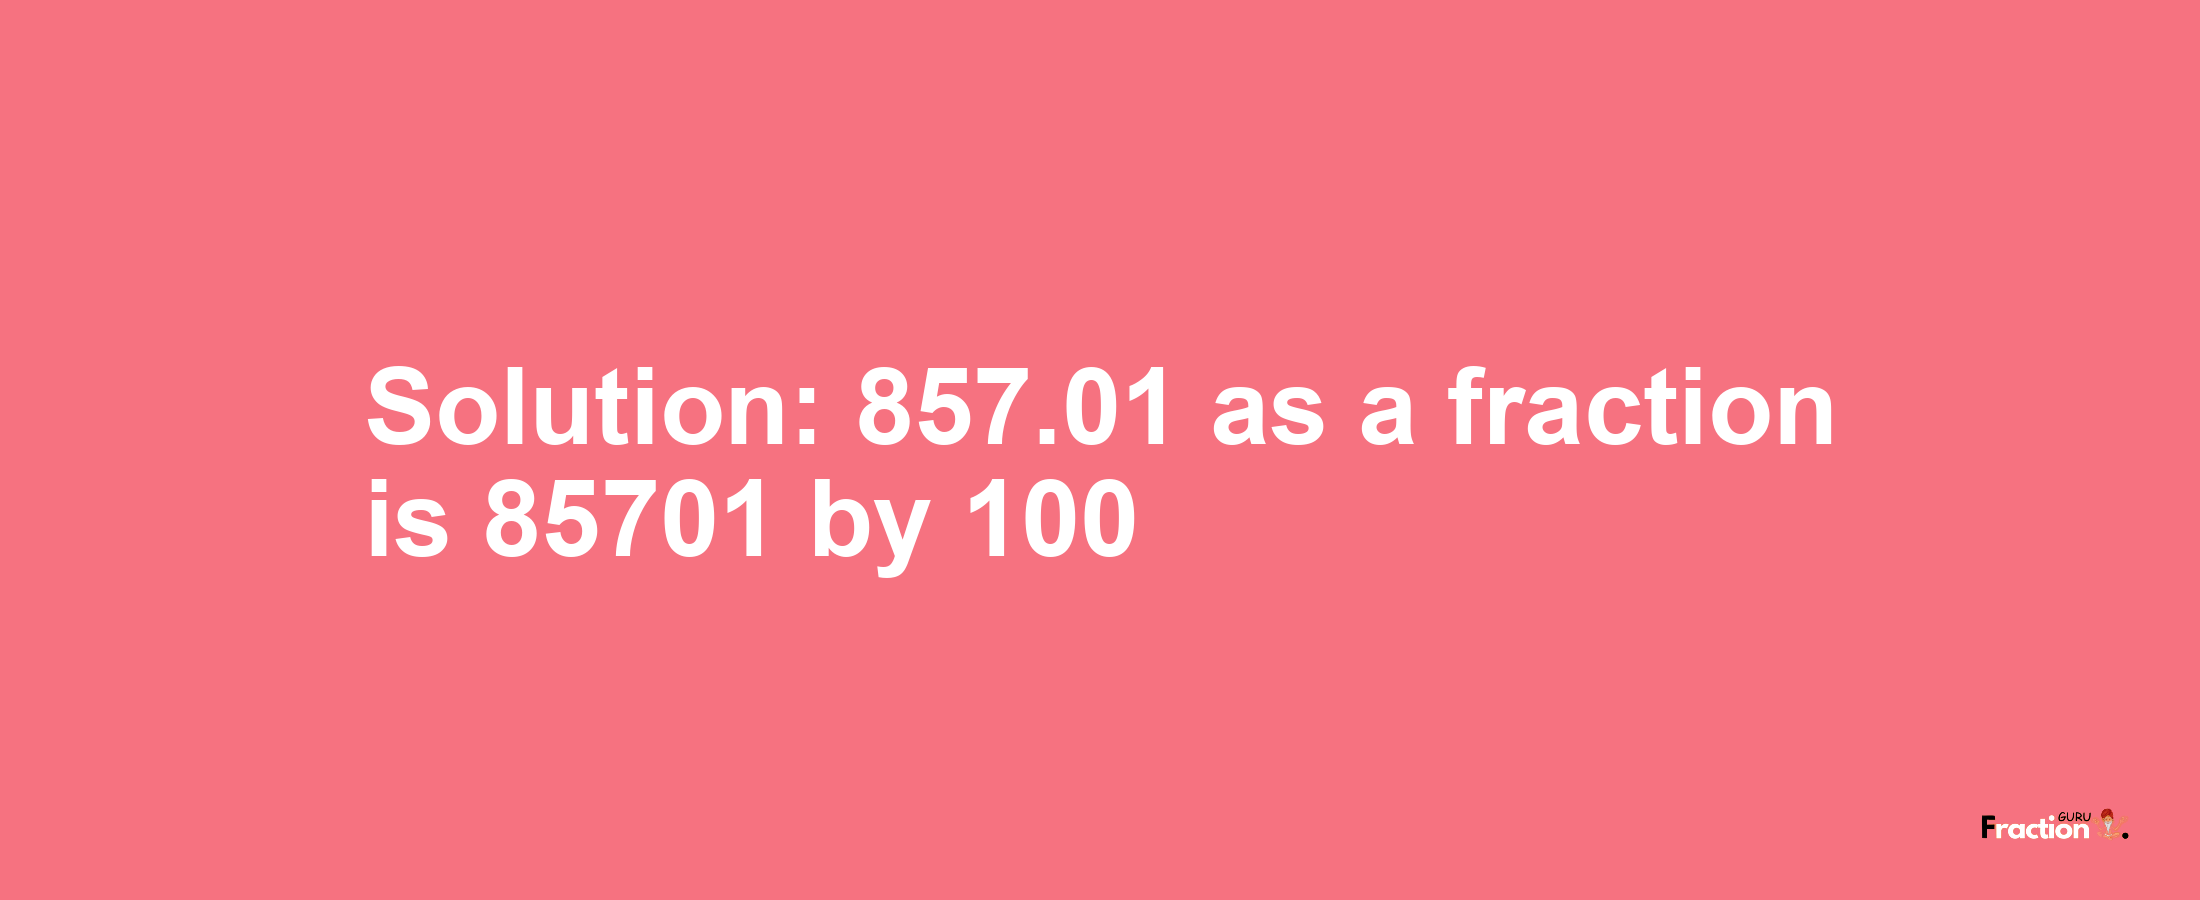 Solution:857.01 as a fraction is 85701/100